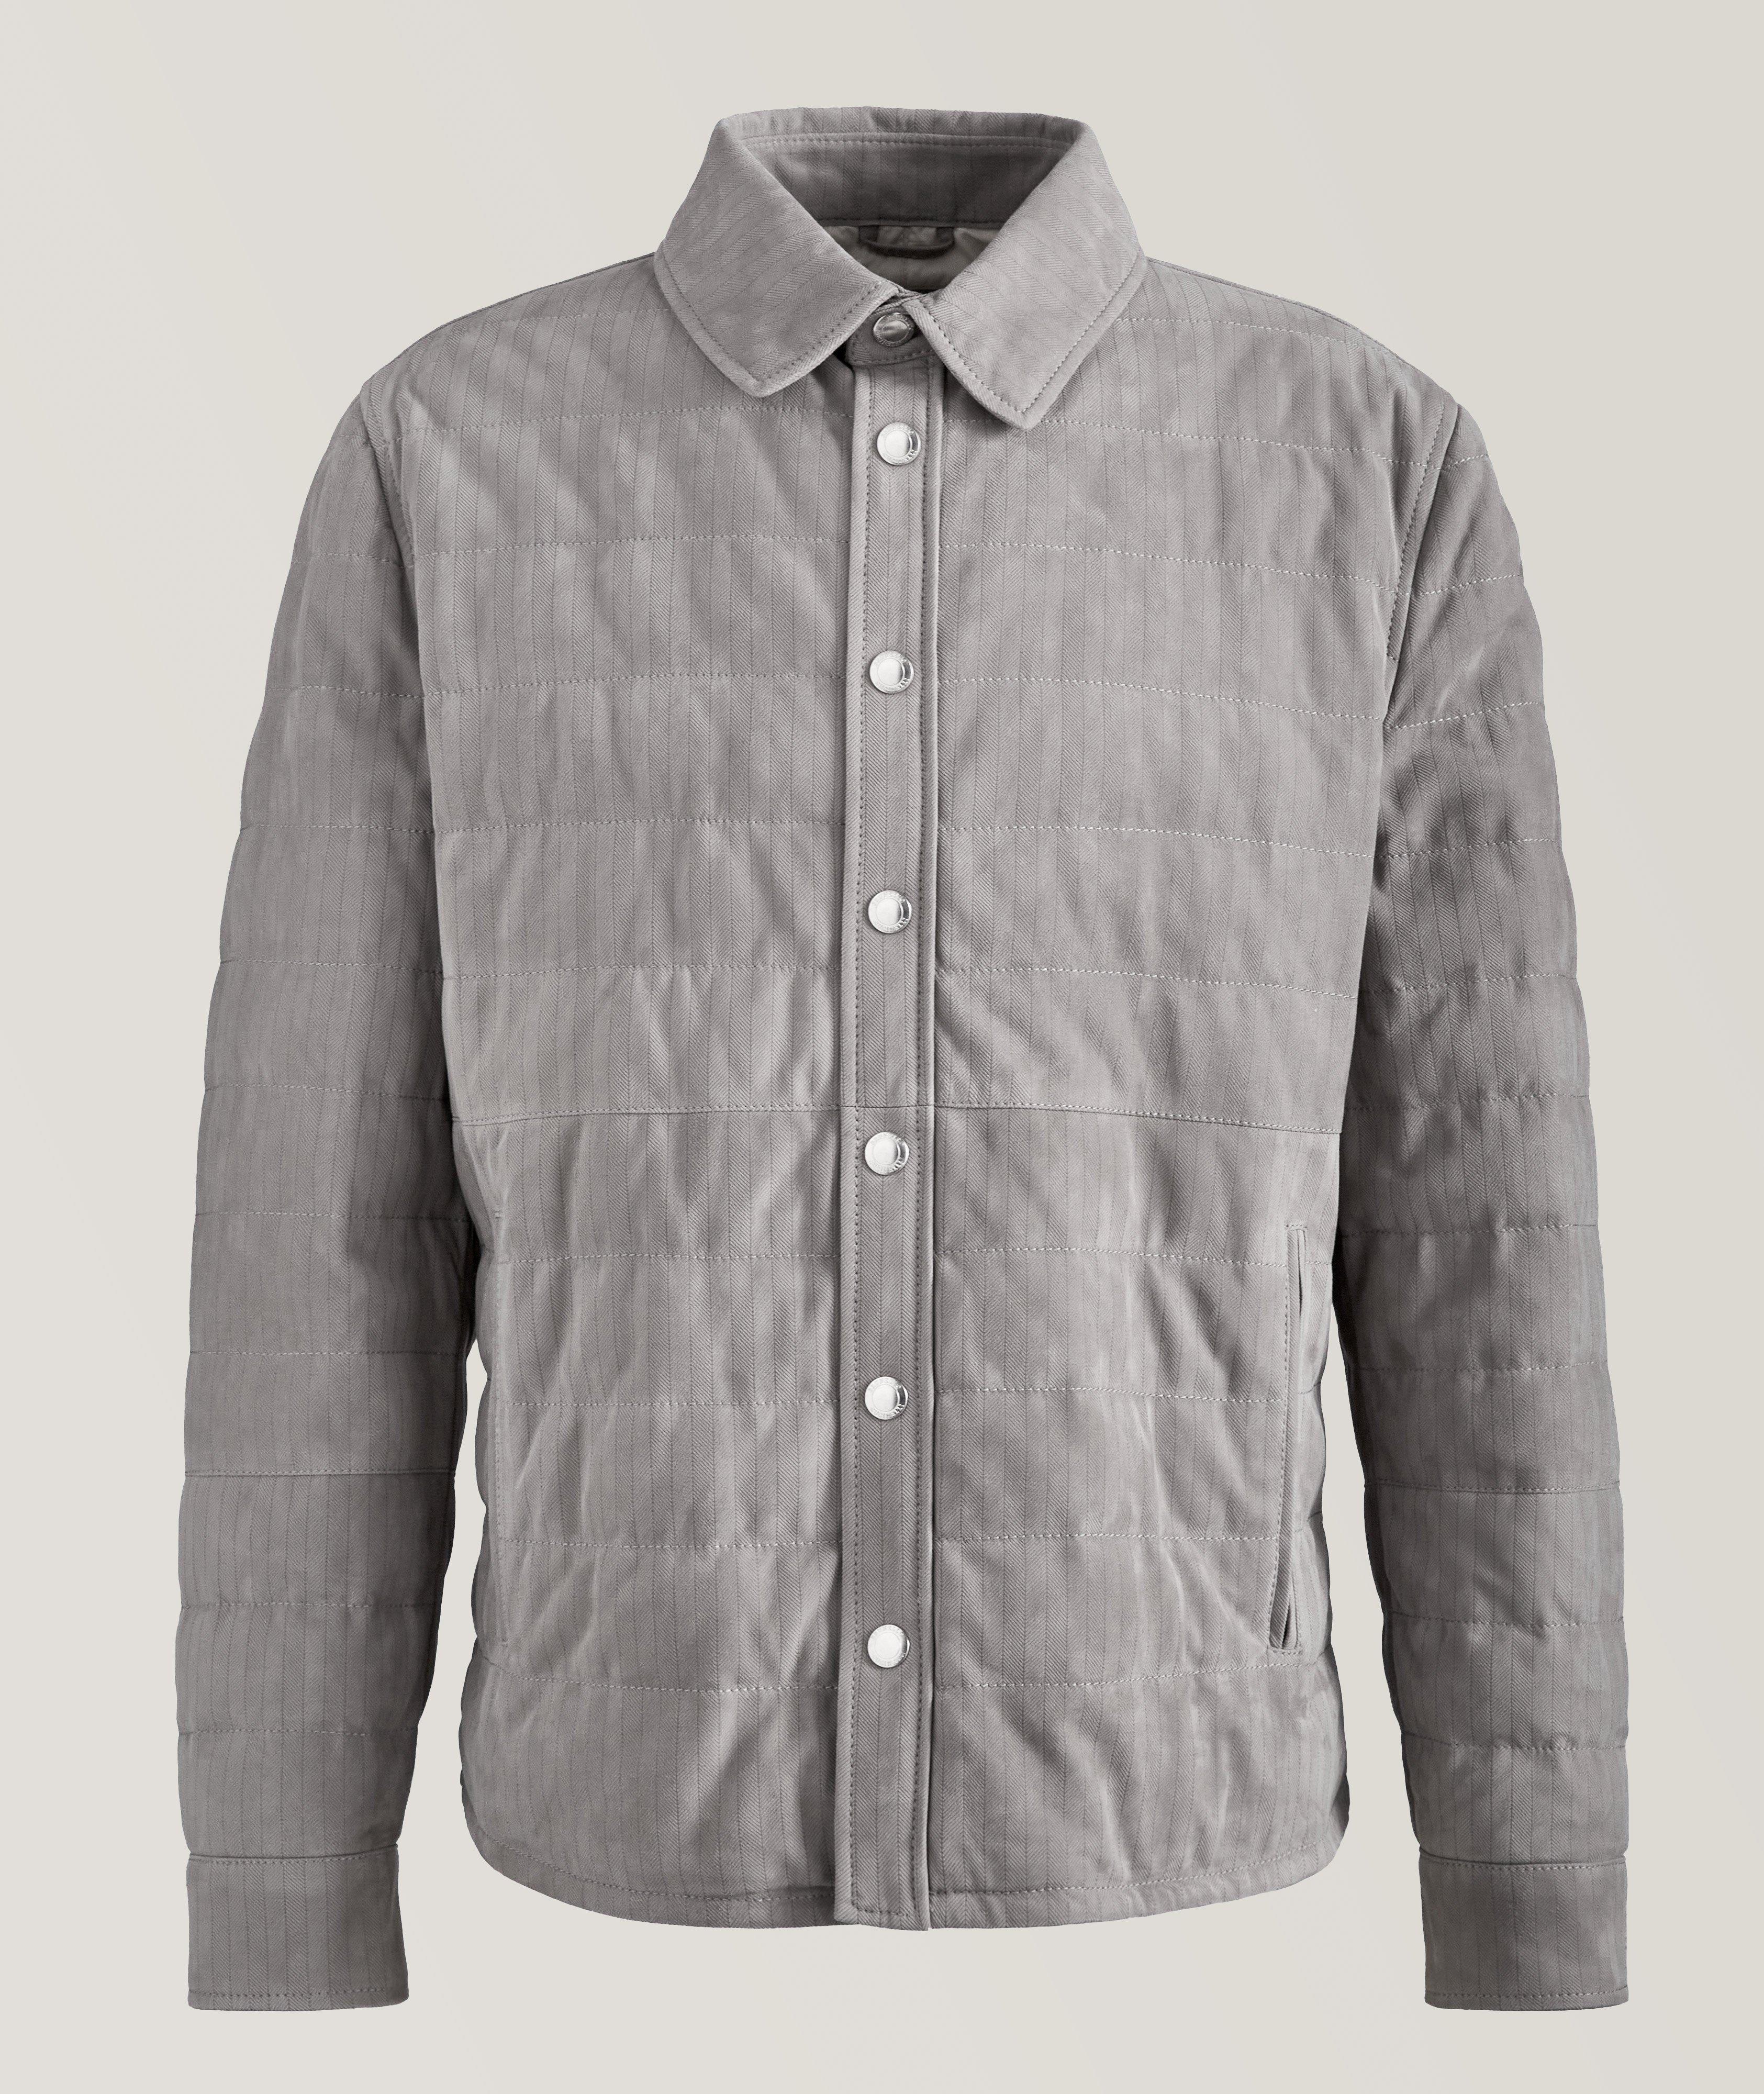 Chevron Quilted Suede Overshirt image 0